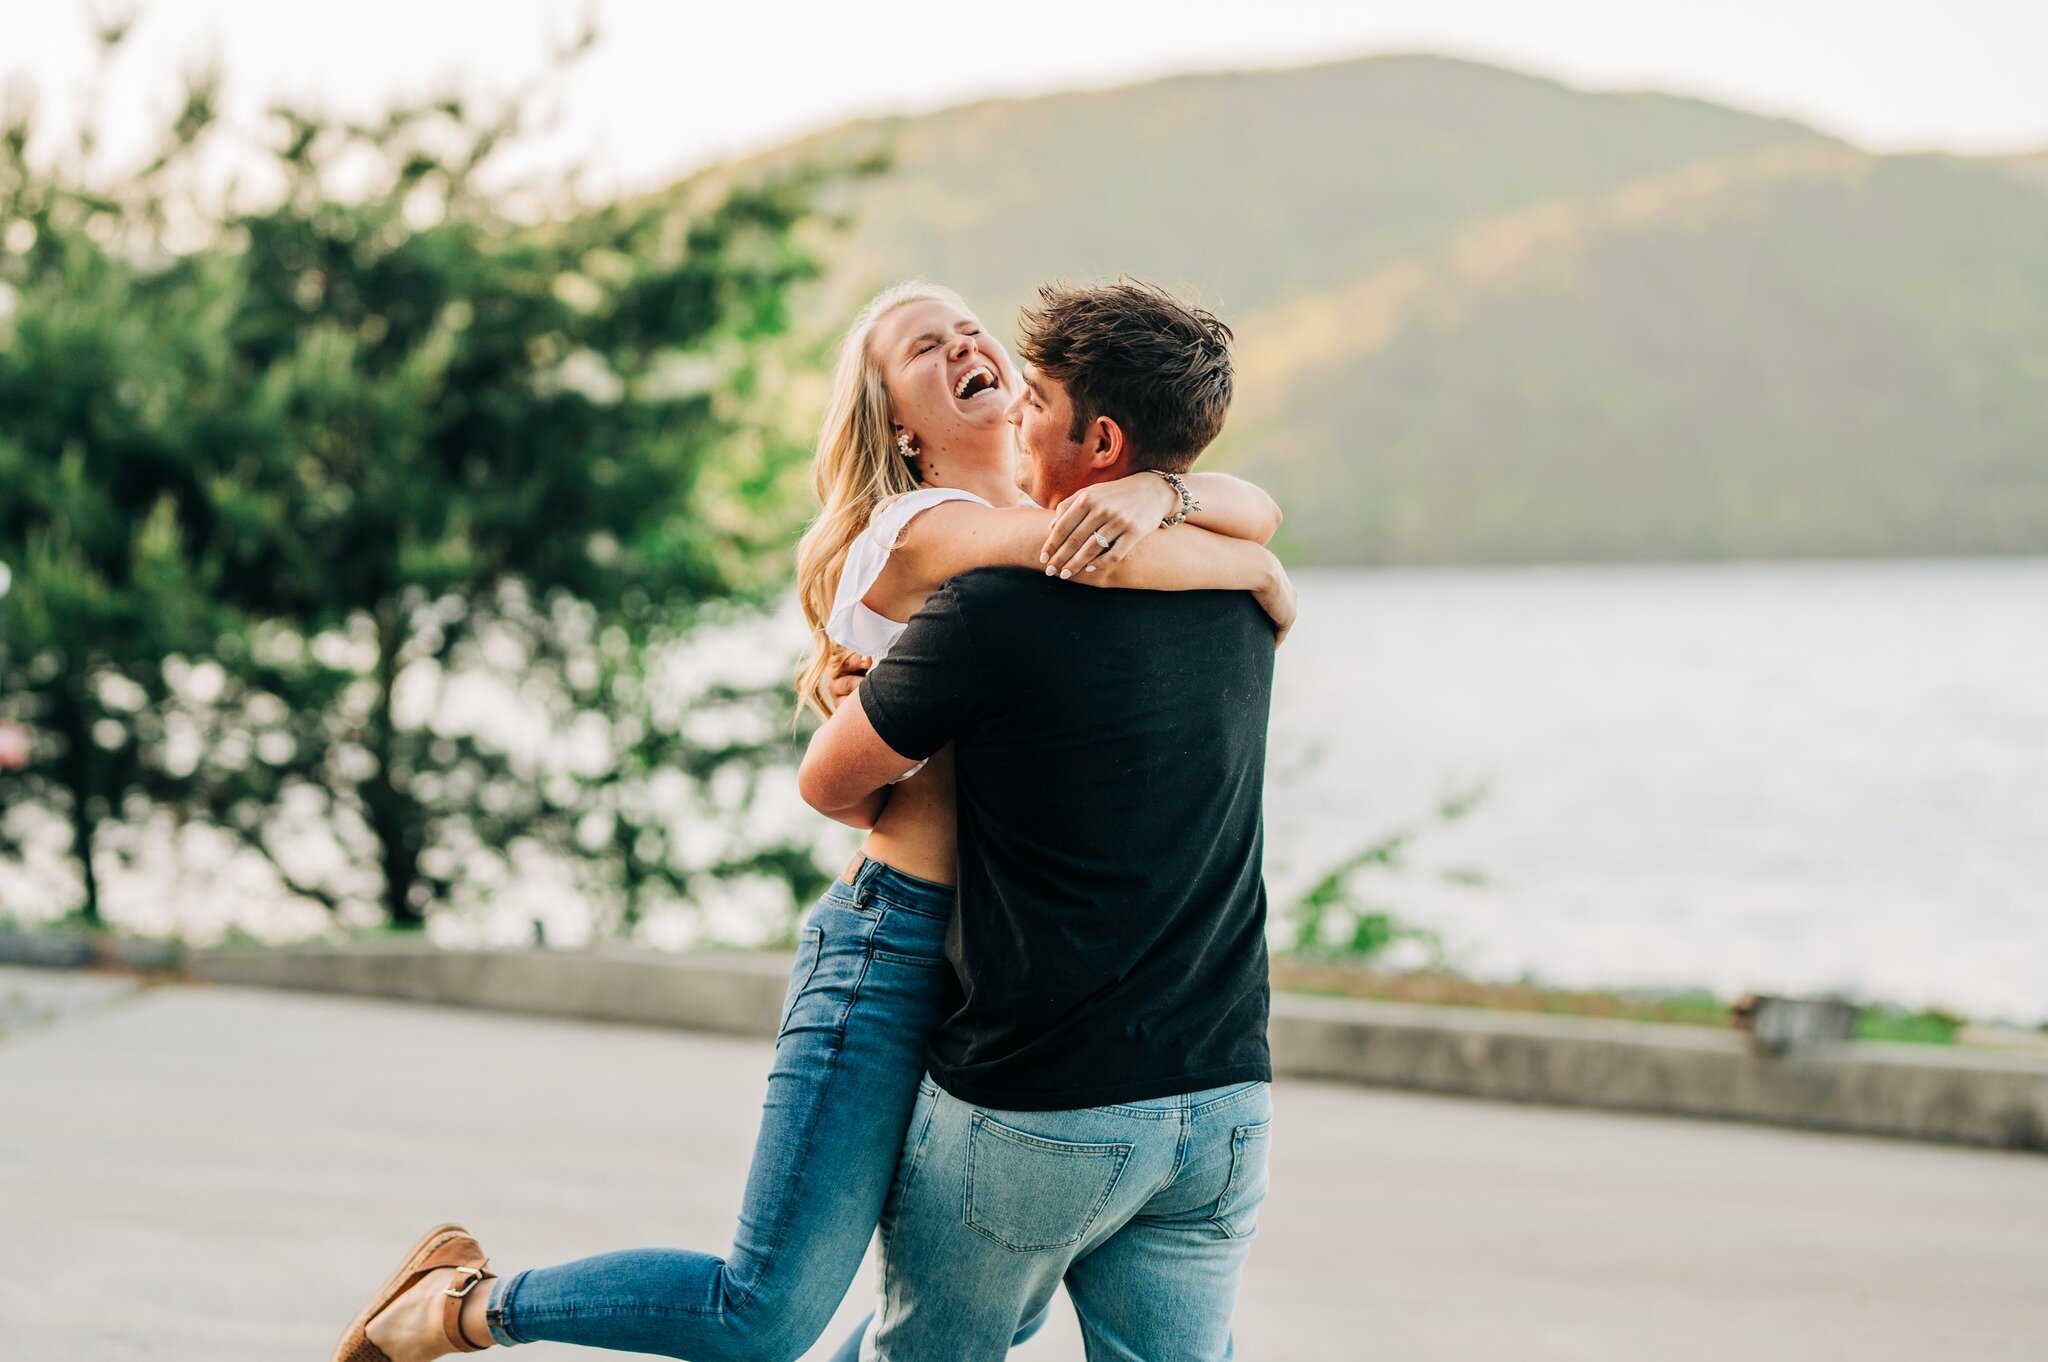 Jordan + Samantha 🤍

Hands down, engagement sessions will always be one of our favorites! 😍

You want to know why? An engagement session gives you (the couple) the chance to relax, get romantic, have some fun, and escape the stress of wedding plann